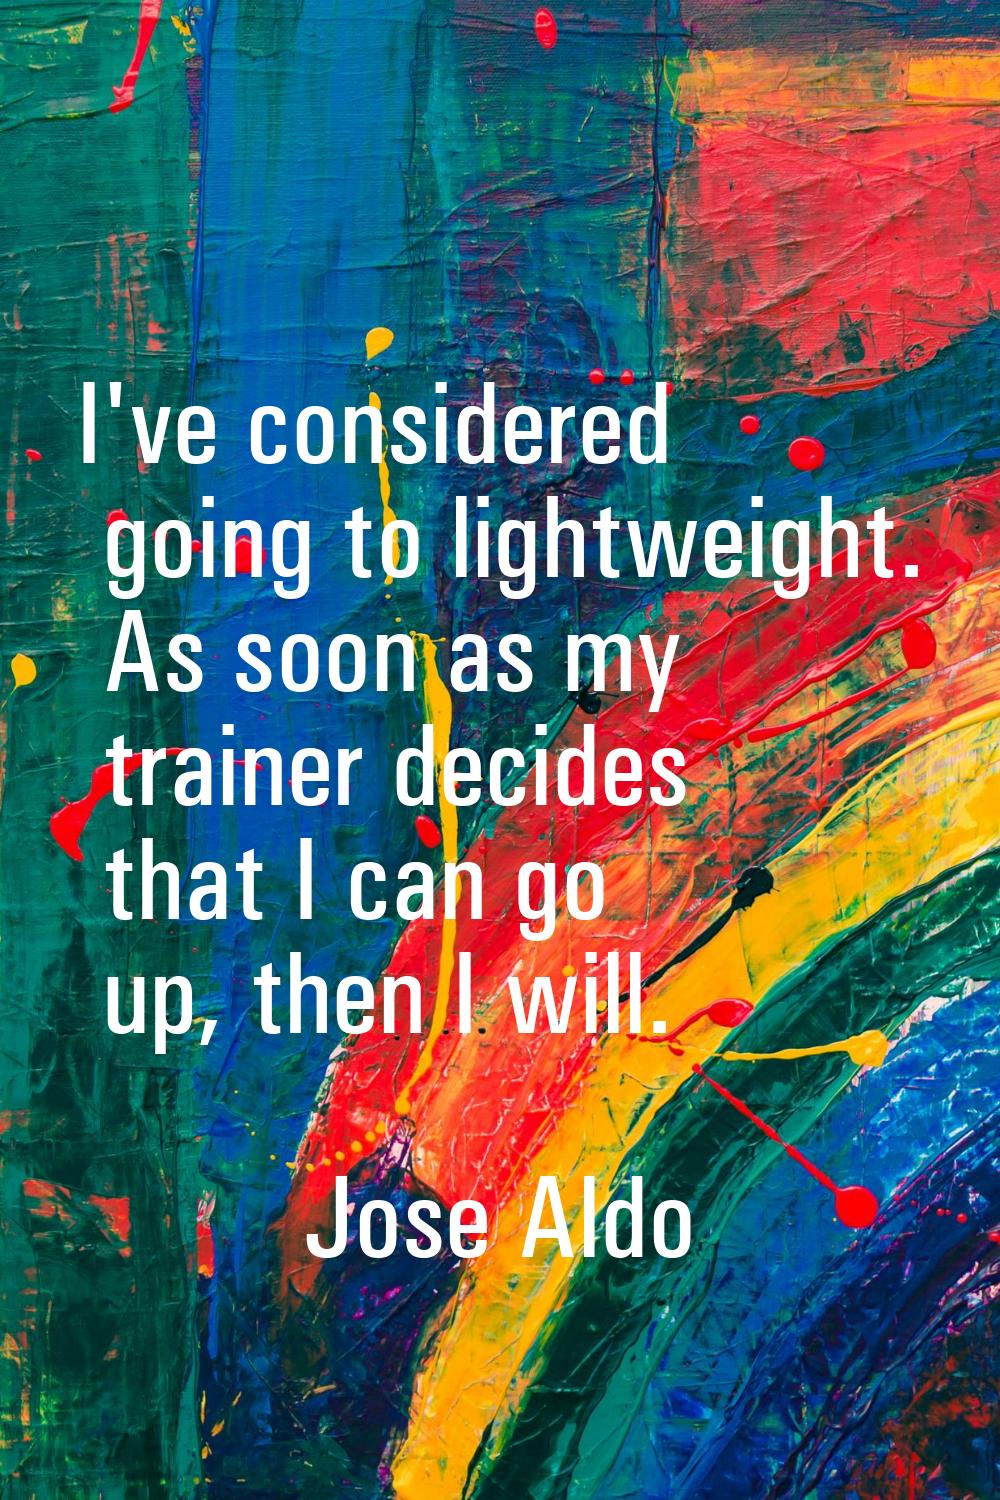 I've considered going to lightweight. As soon as my trainer decides that I can go up, then I will.